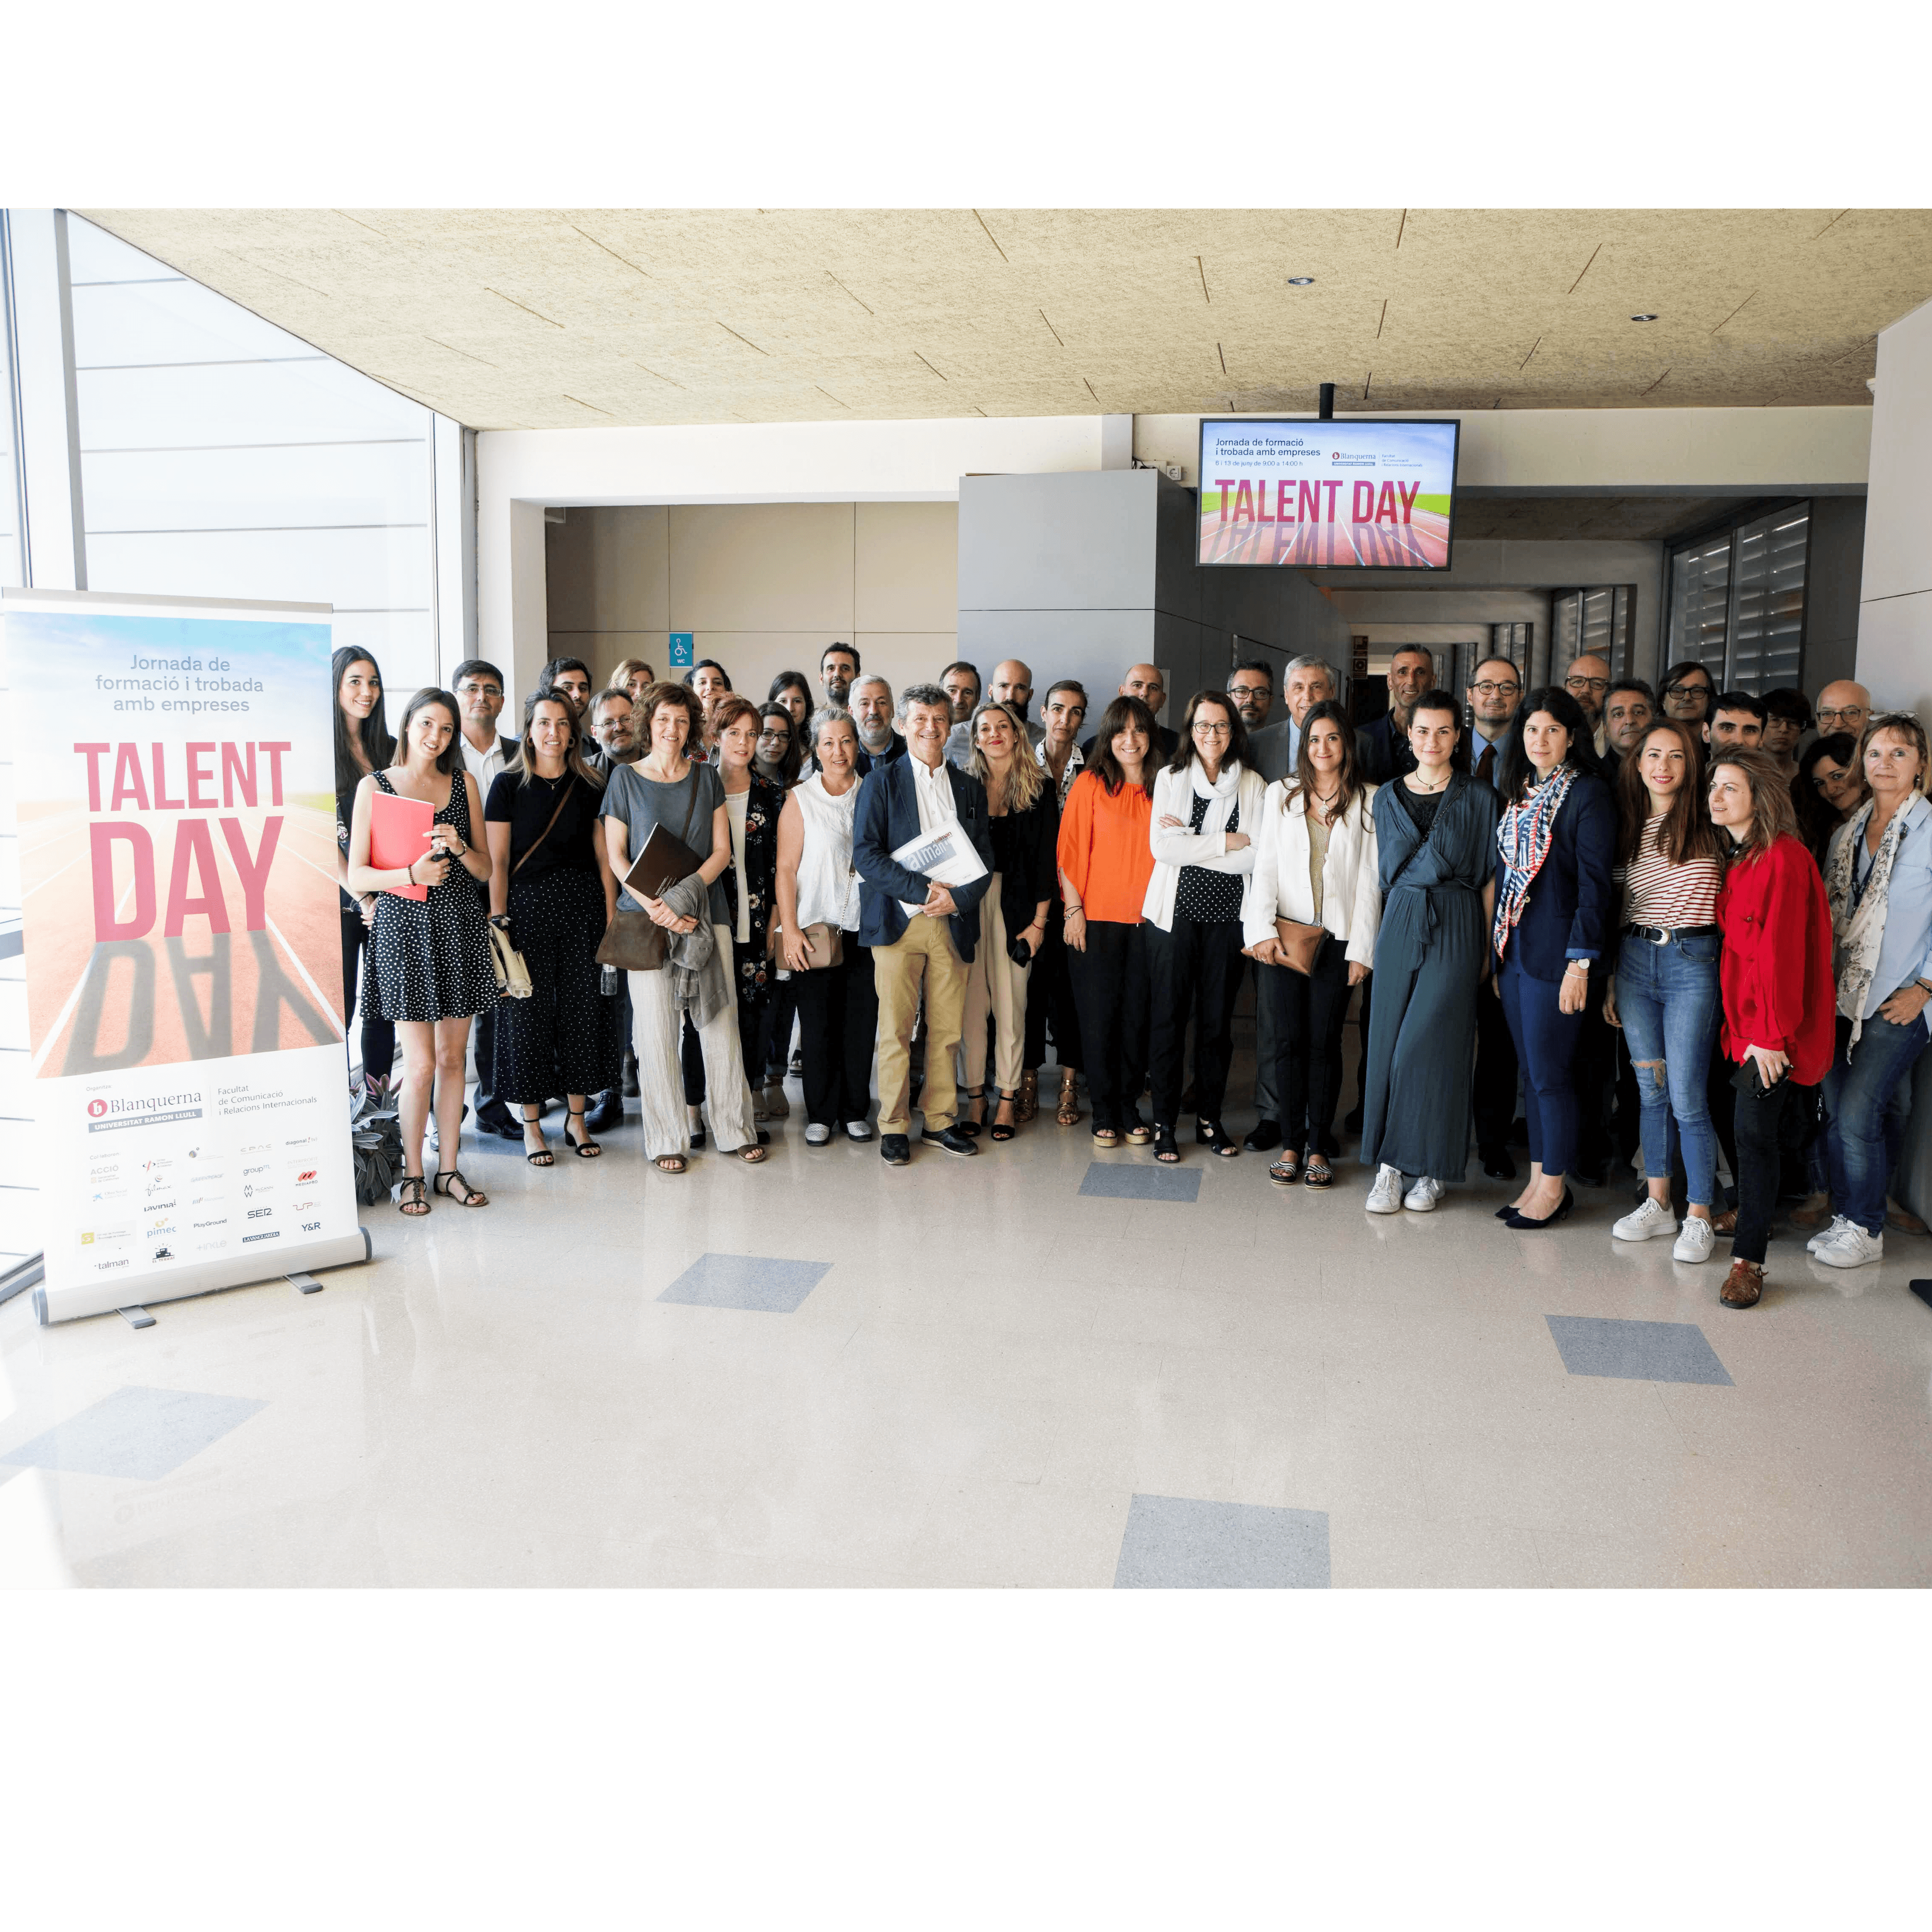 The School organizes the third «Talent Day» specializing in communication and international relations in Catalonia